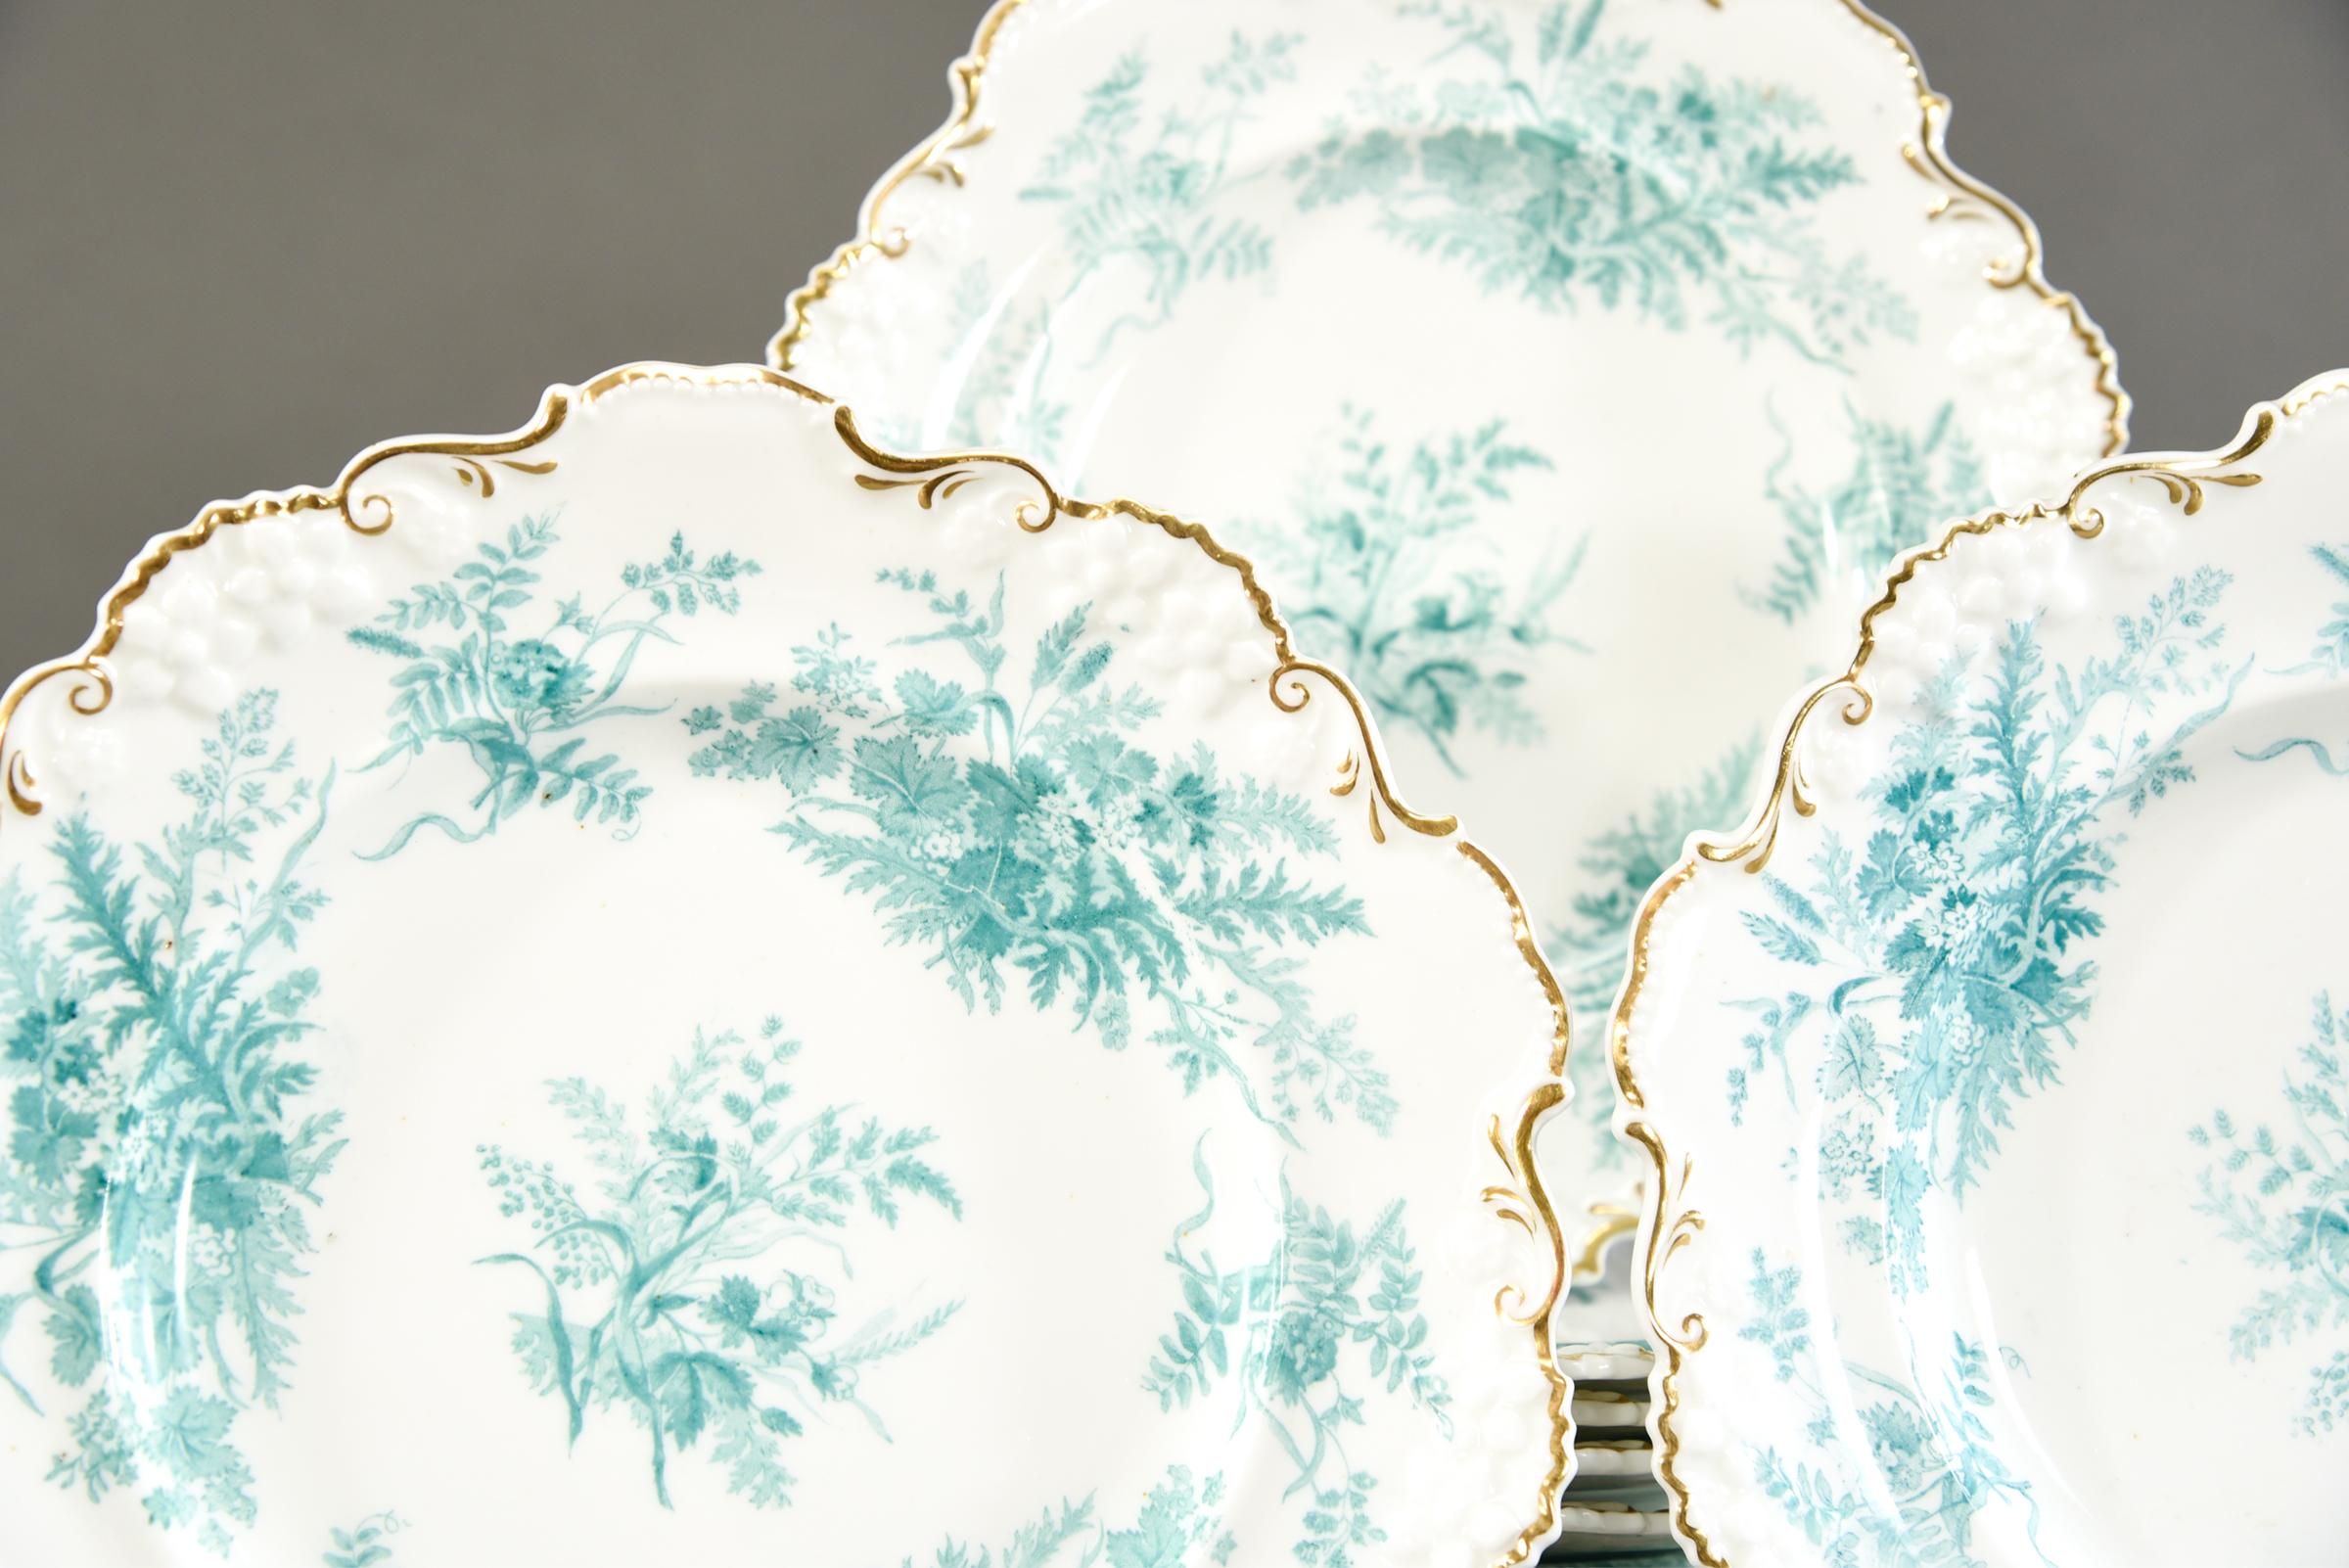 English  13 Davenport 19th c.  Dessert Set W/ Aesthetic Movement Teal Blue Fern Subjects For Sale